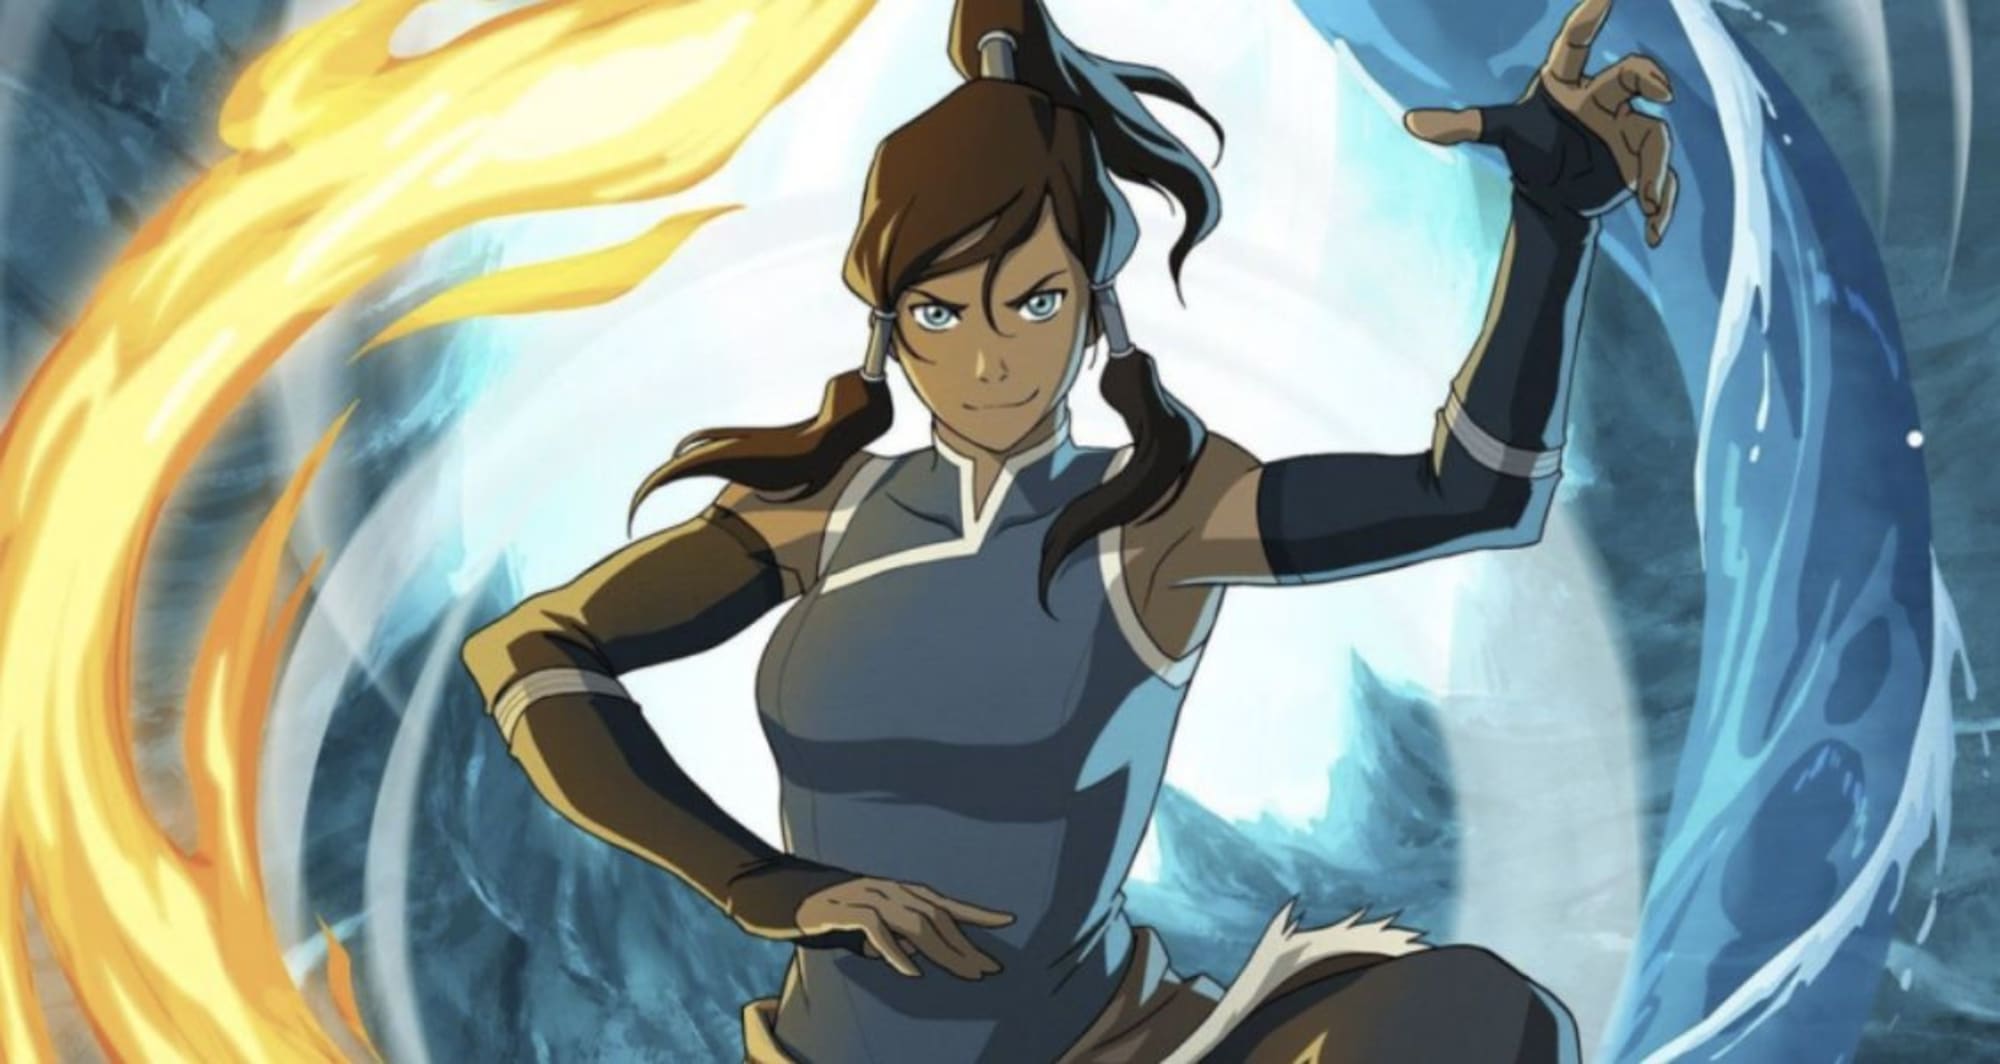 New Avatar The Last Airbender show set after The Legend of Korra is coming